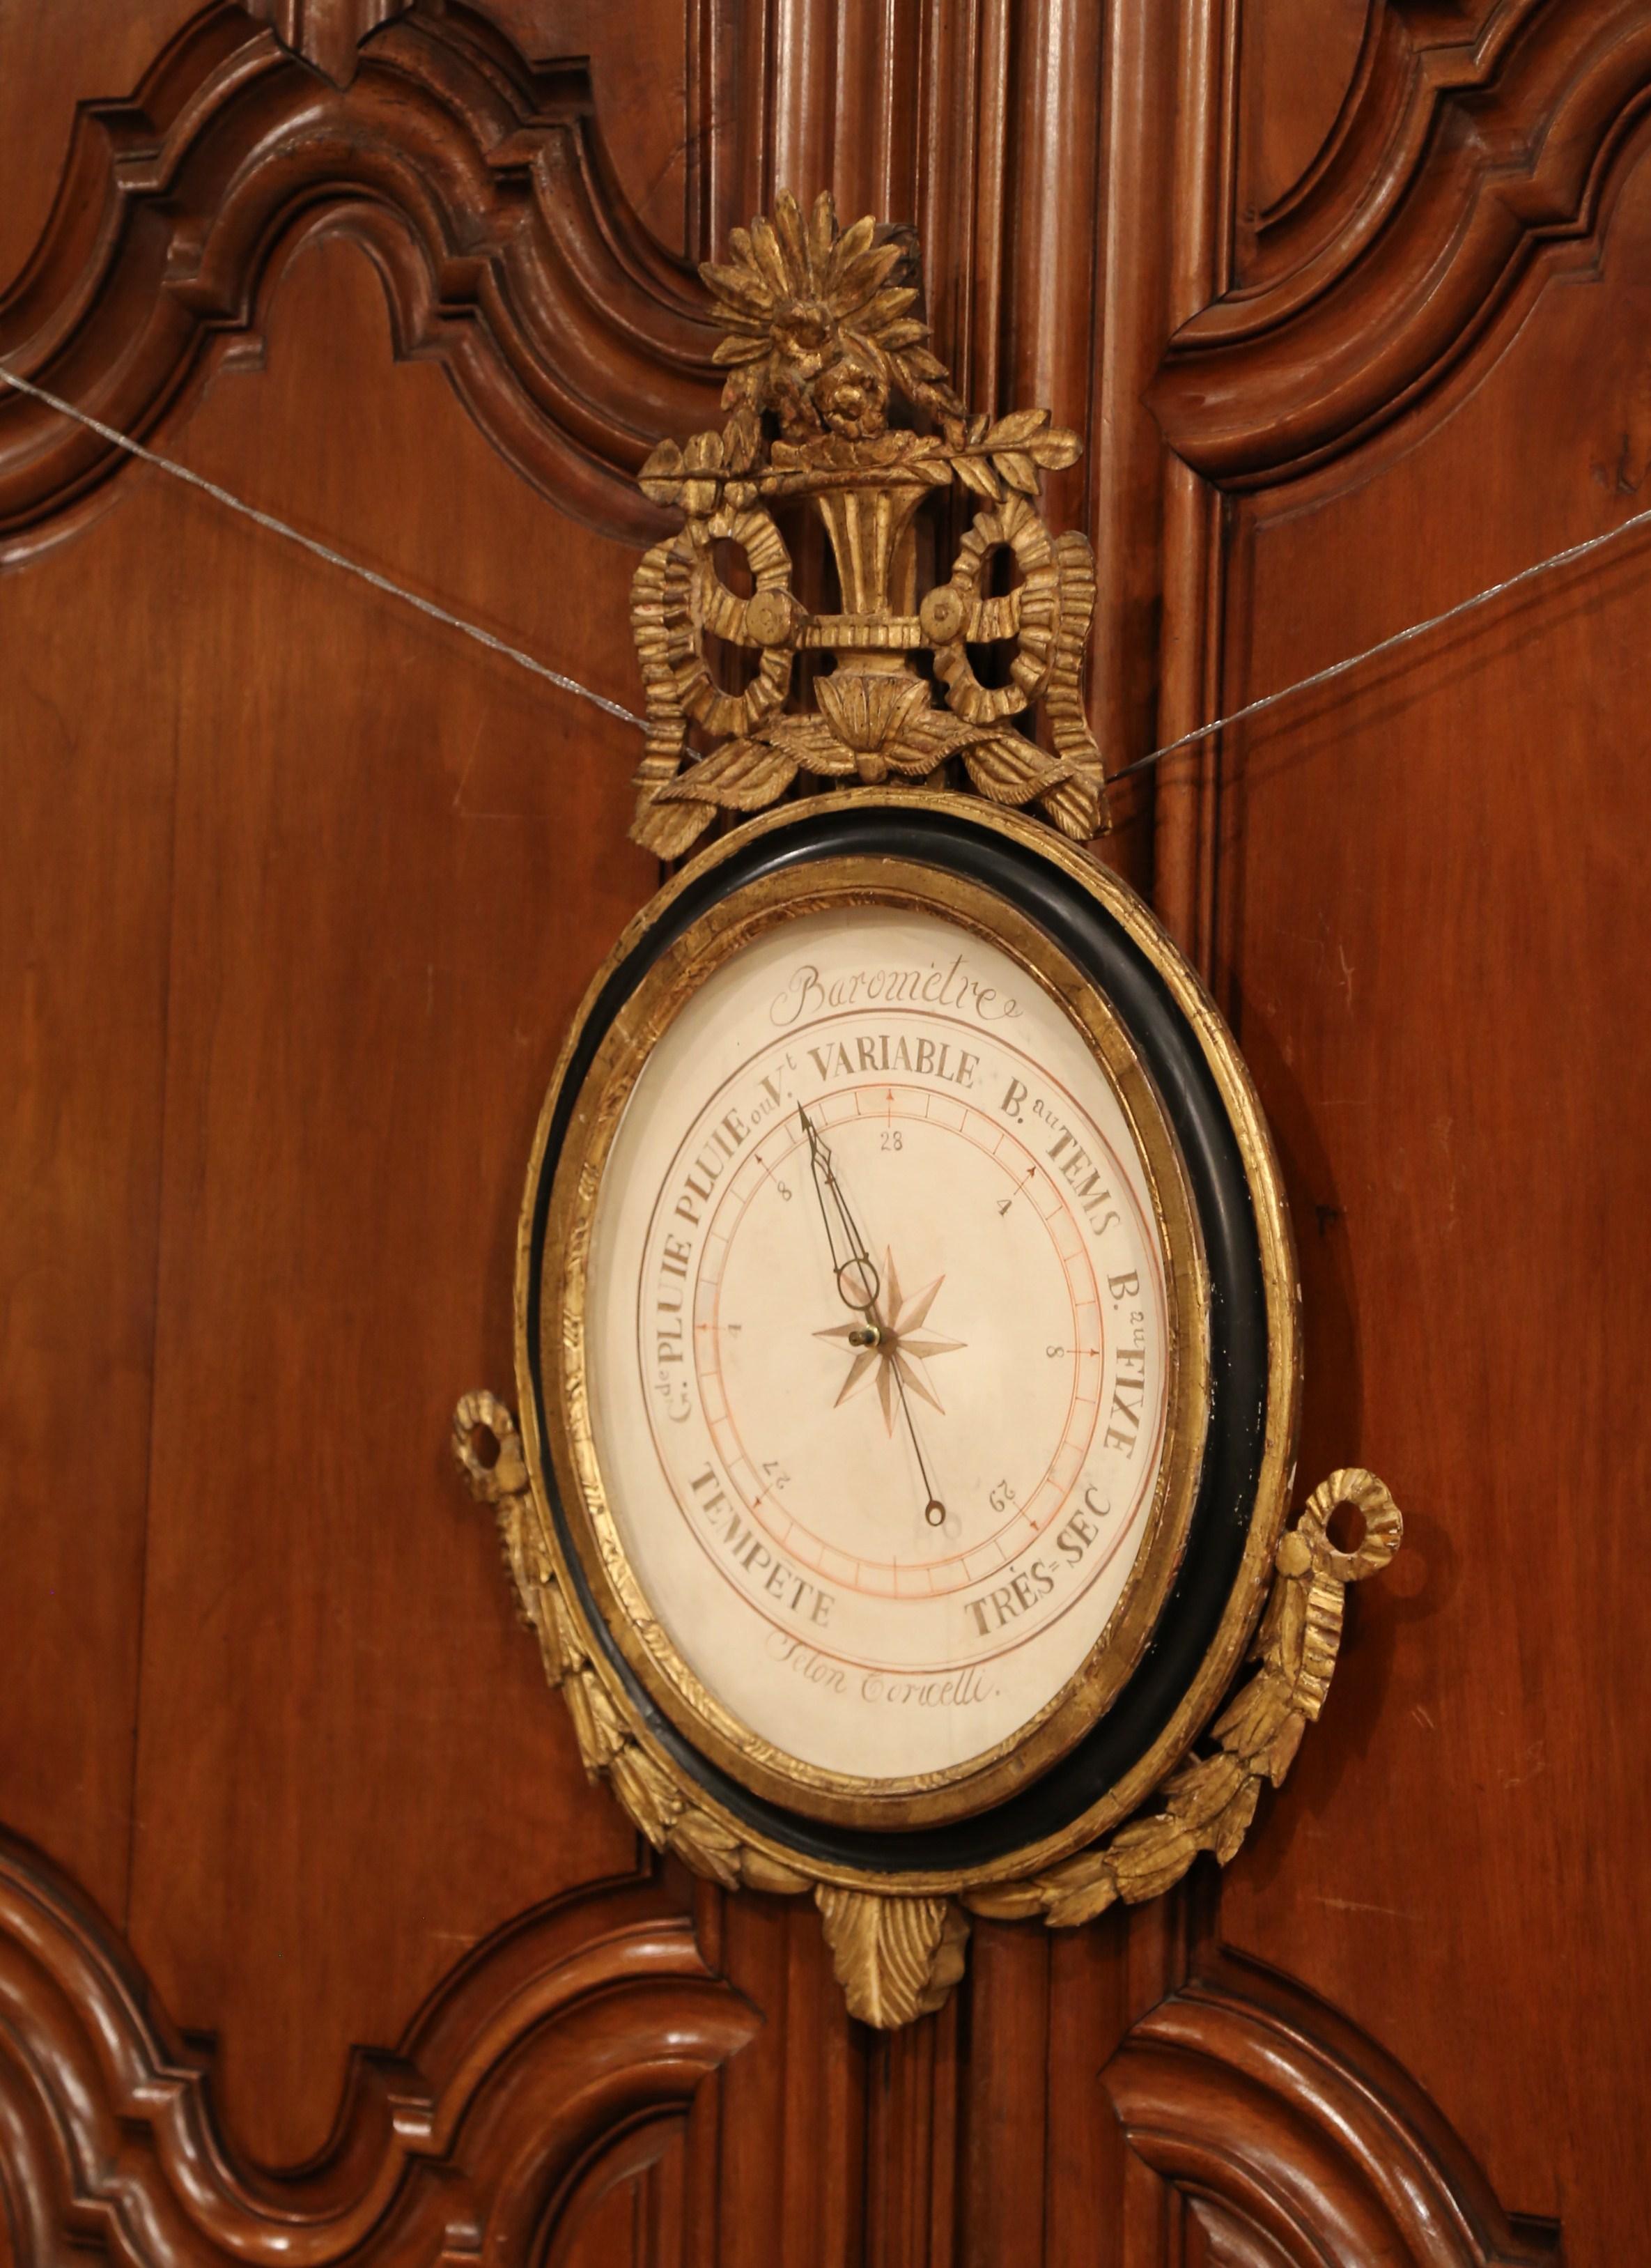 This elegant, antique Louis XVI barometer was crafted in Paris, France, circa 1760. The large oval shaped wall piece features its original hand painted parchment paper barometer with French inscriptions written in Indian ink. The frame is adorned